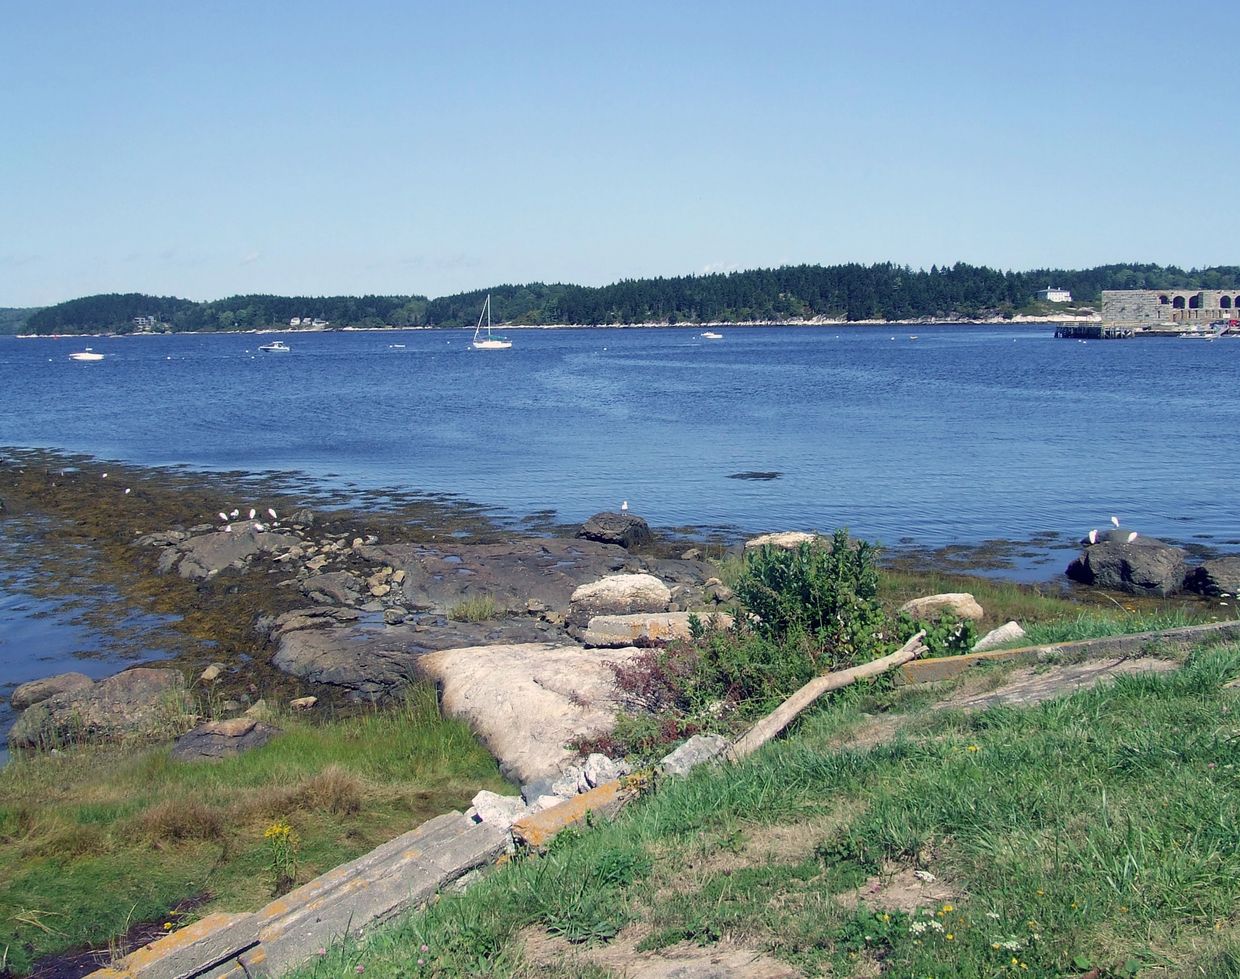 View of Kennebec River, Phippsburg, Maine from 1607 Popham Colony Site showing river, lawn, Fort Pop